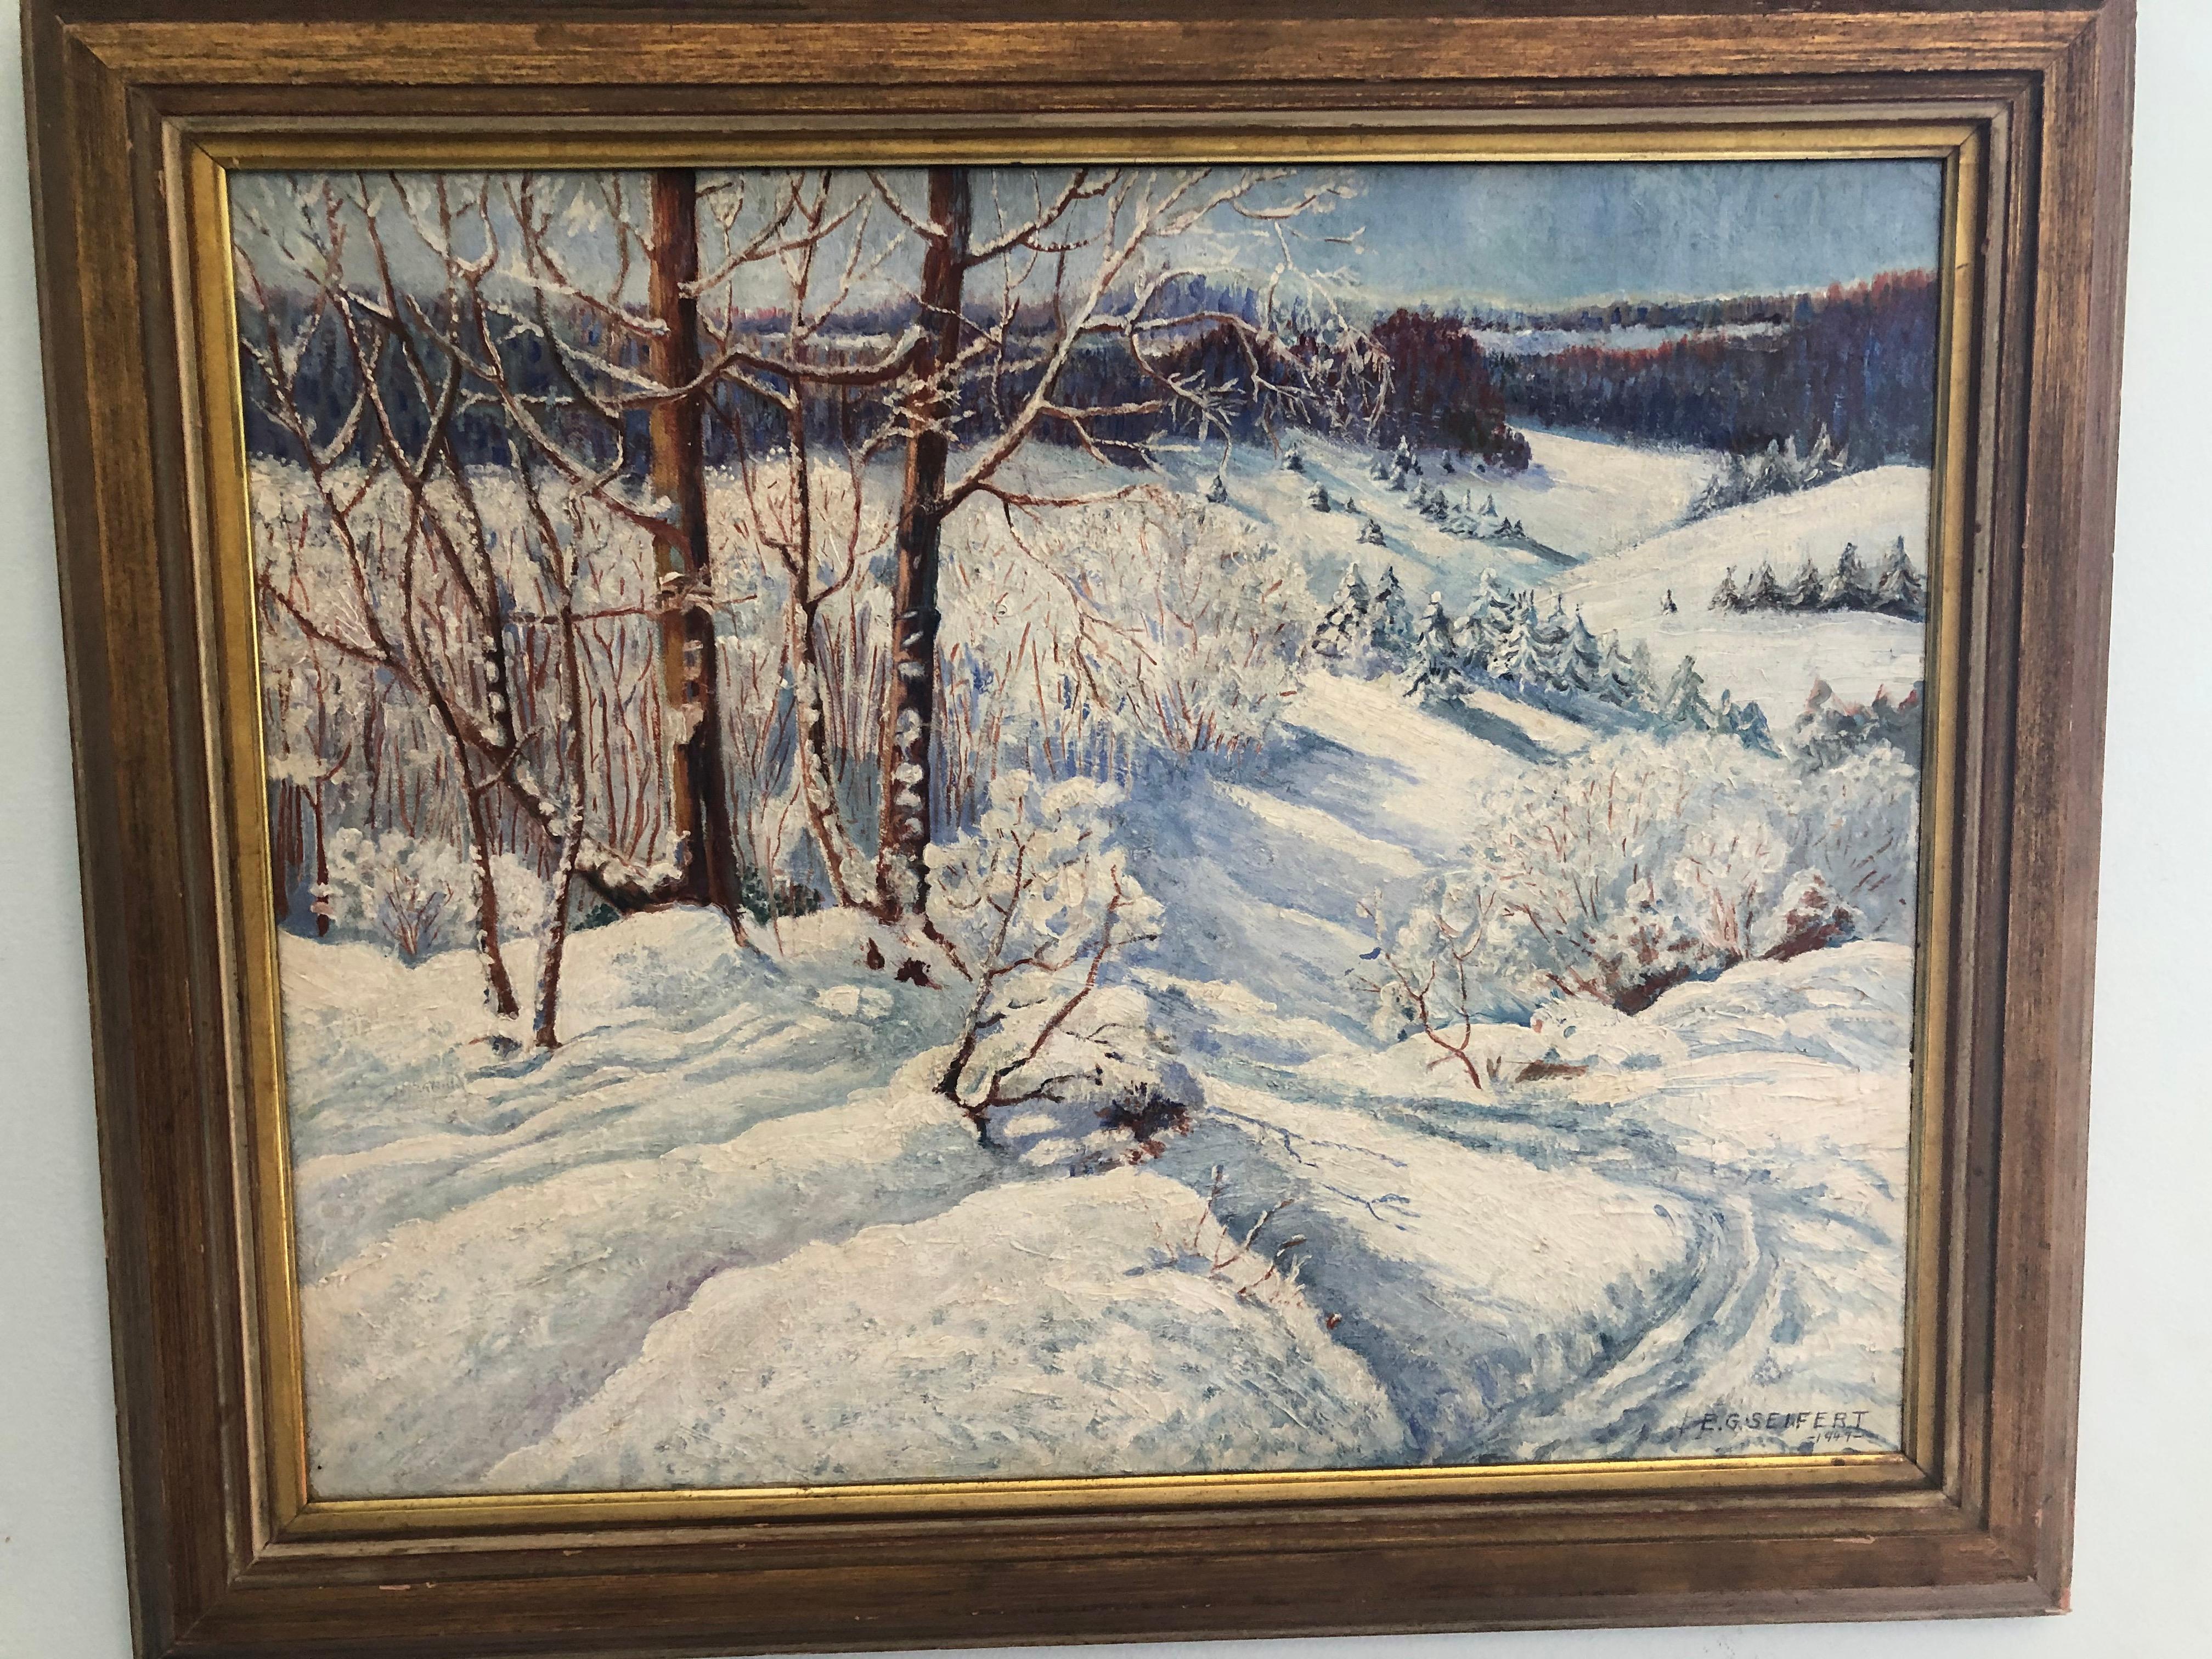 1947 American Winter Landscape - Painting by Unknown